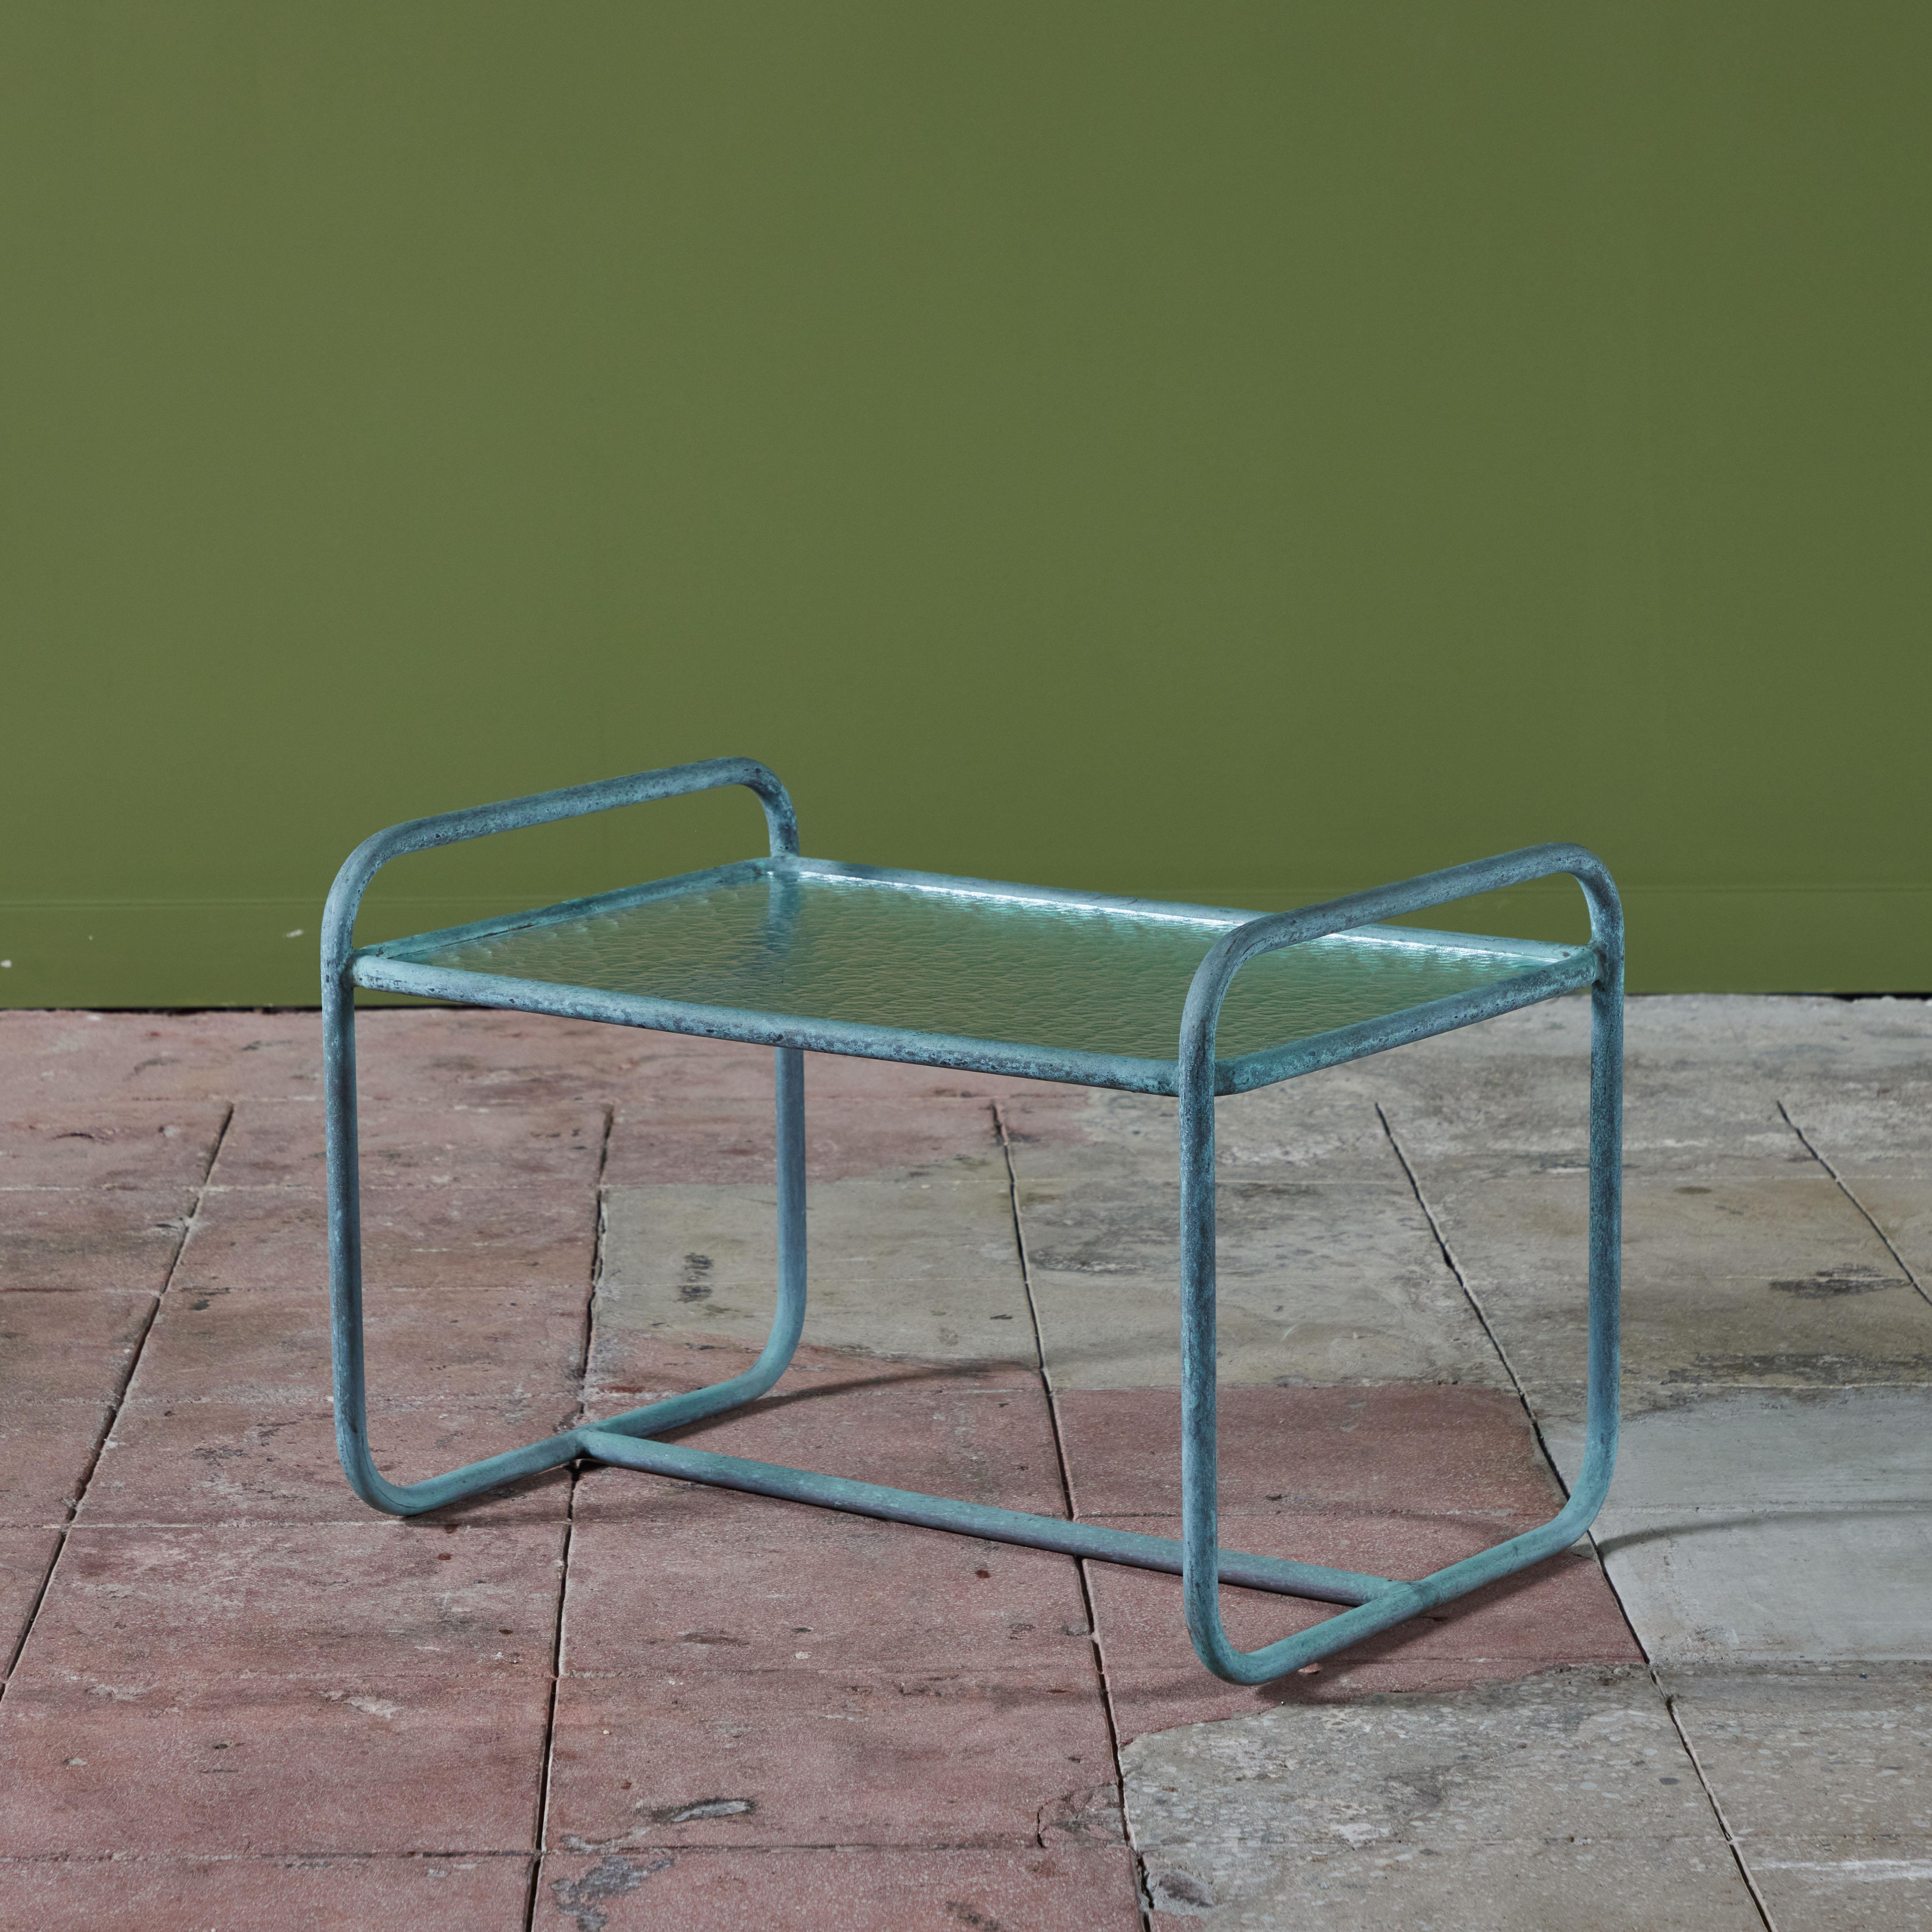 Patio side table designed by Walter Lamb and produced by Brown Jordan. The table frame is bronze tubing with a verdigris patina with an inset hammered glass tabletop. Two curved rails form the legs and create the “handles” on either side of the